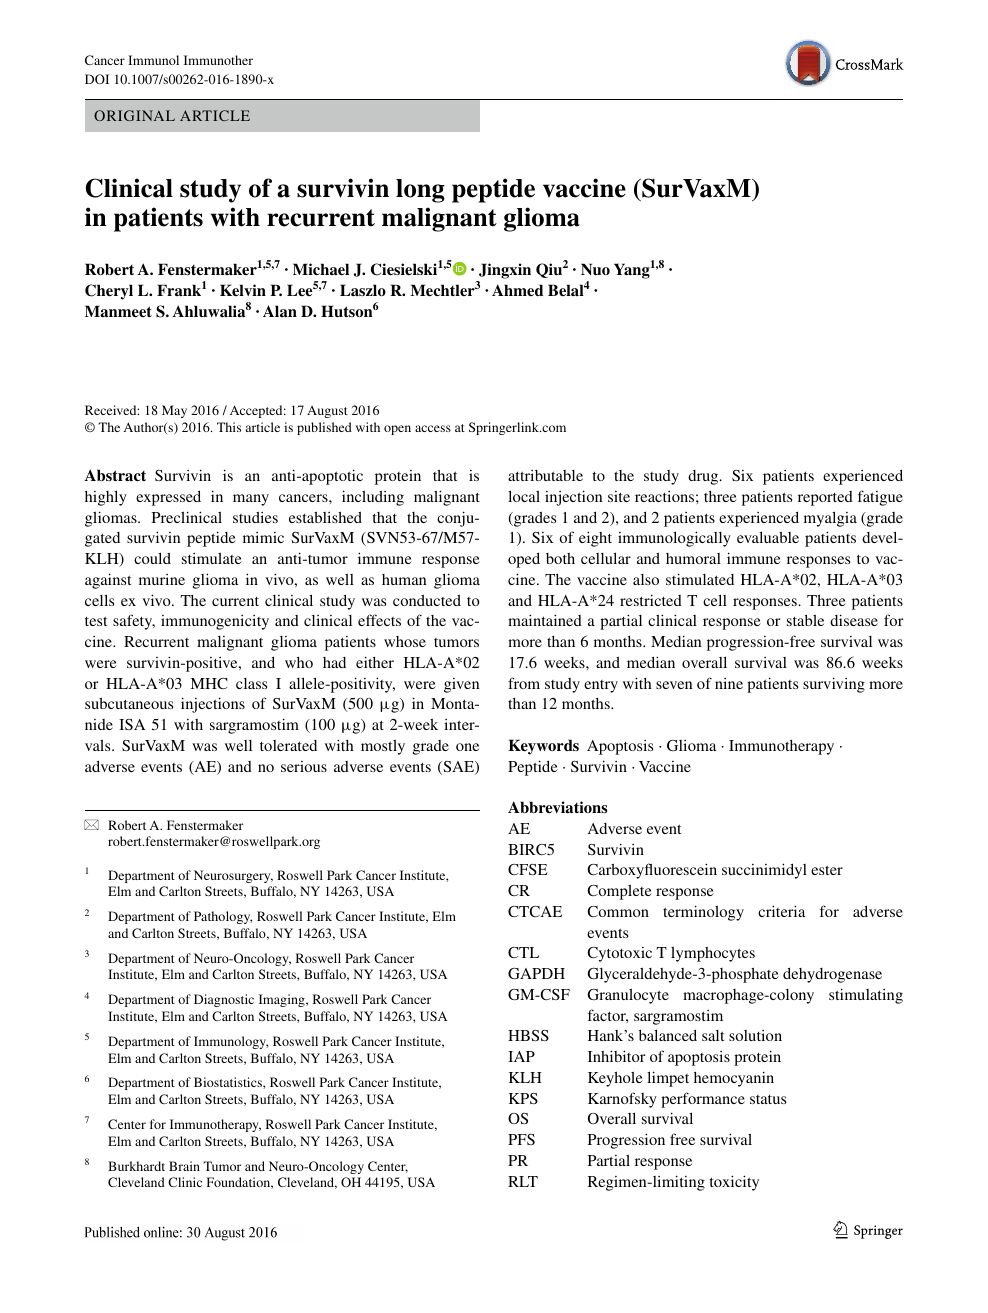 Clinical Study Of A Survivin Long Peptide Vaccine Survaxm In Patients With Recurrent Malignant Glioma Topic Of Research Paper In Clinical Medicine Download Scholarly Article Pdf And Read For Free On